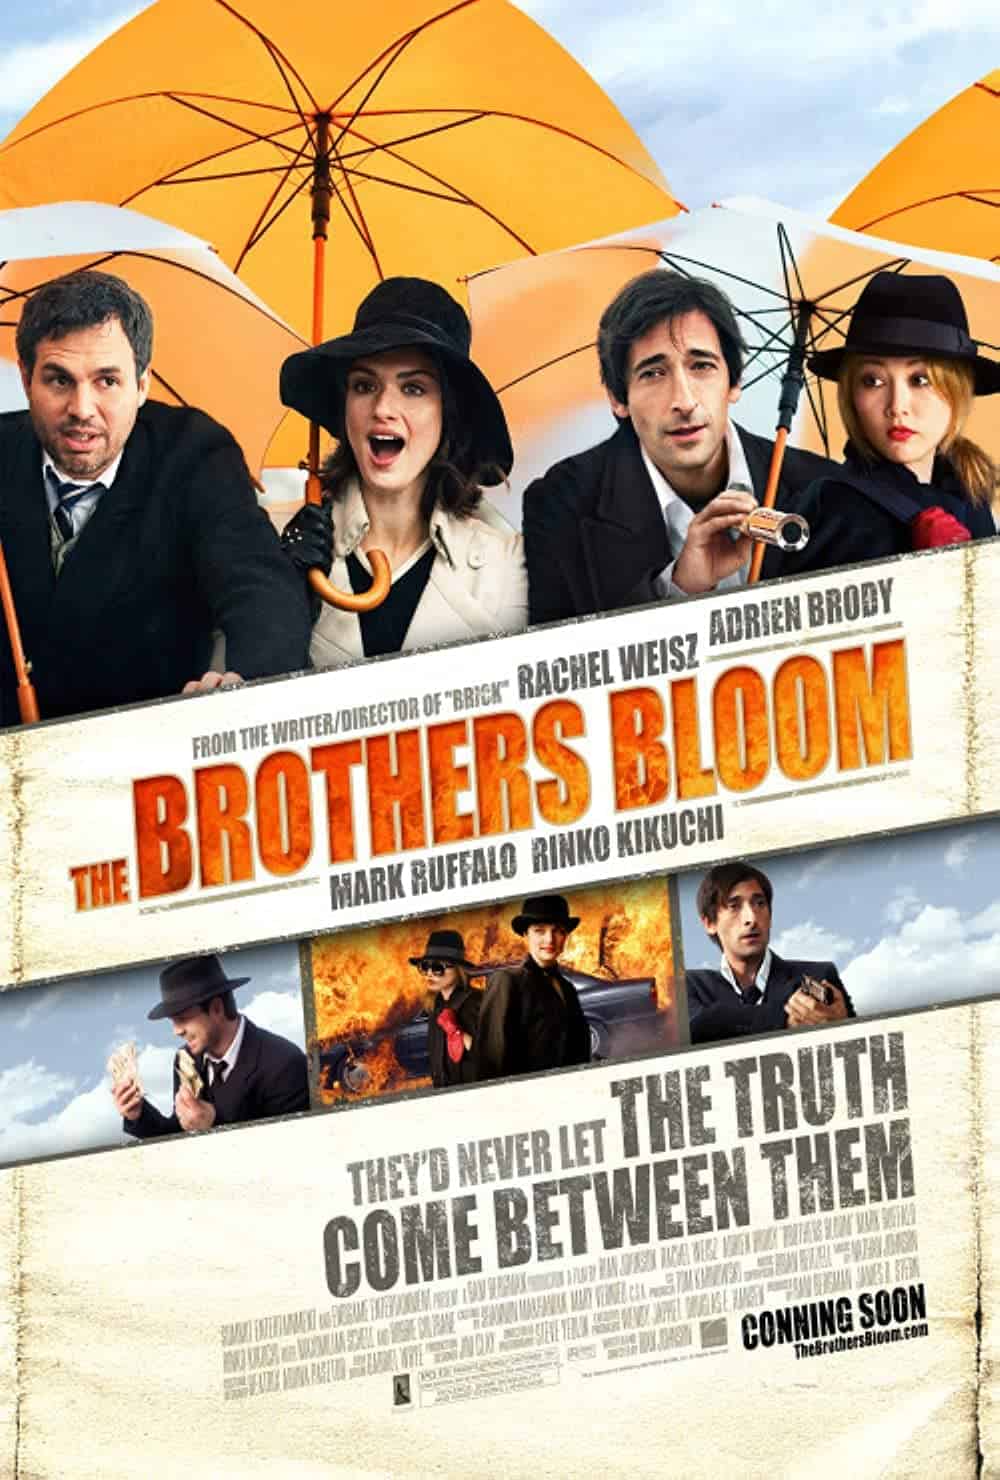 The Brothers Bloom (2008) 15 Best Con Movies to Add in Your Watchlist